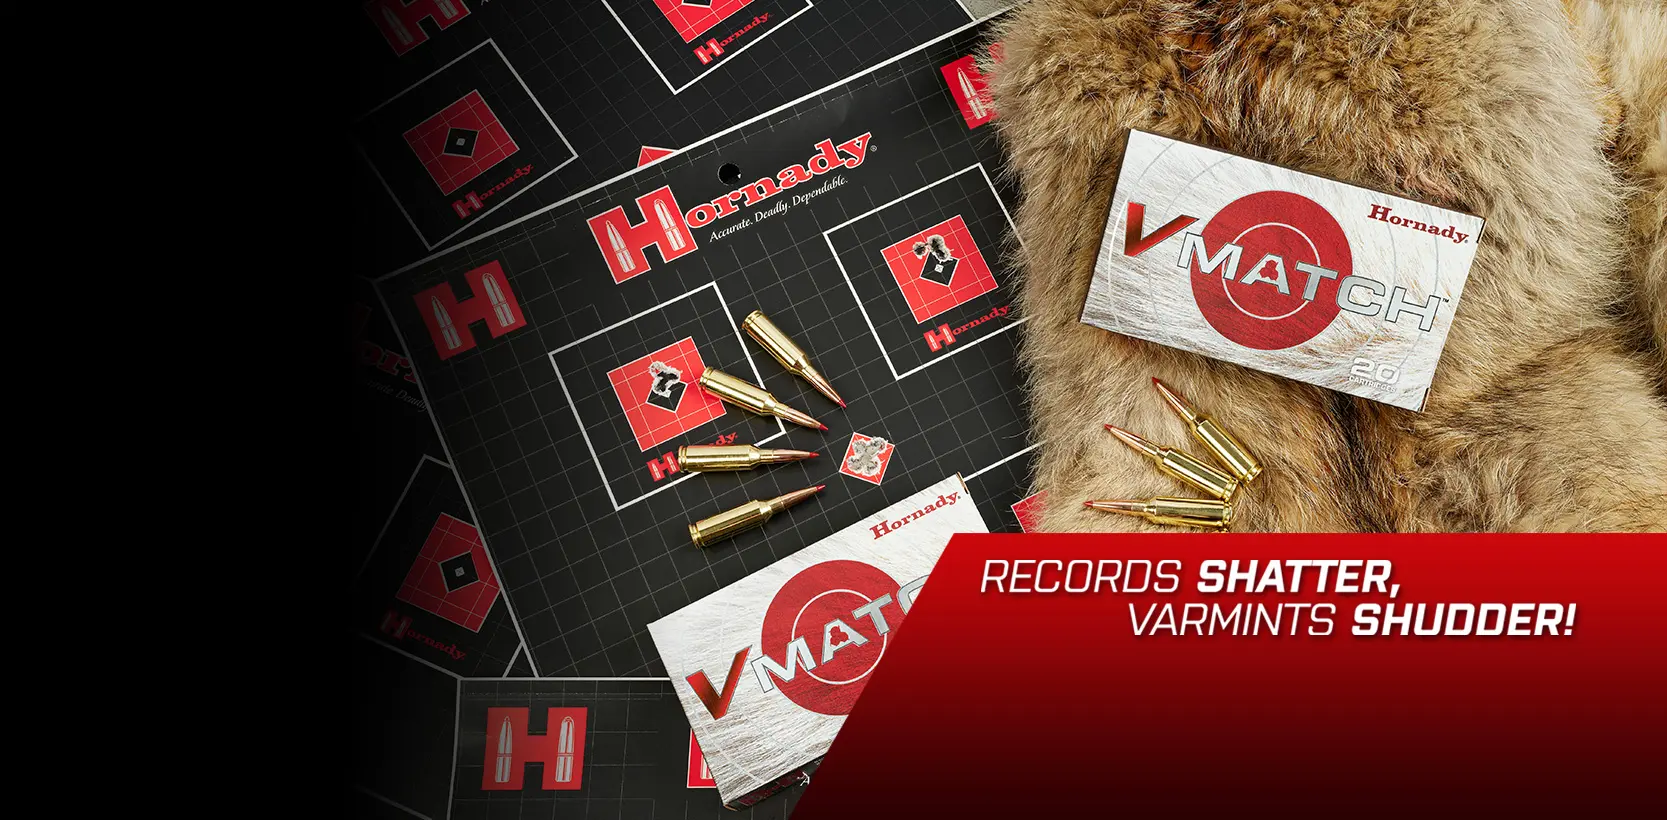 Slide number 2 INNOVATIONPRECISION & PERFORMANCE
Elevate your varmint shooting experience, shatter records, and make your mark like never before with V-Match™ ammunition.Find Out More